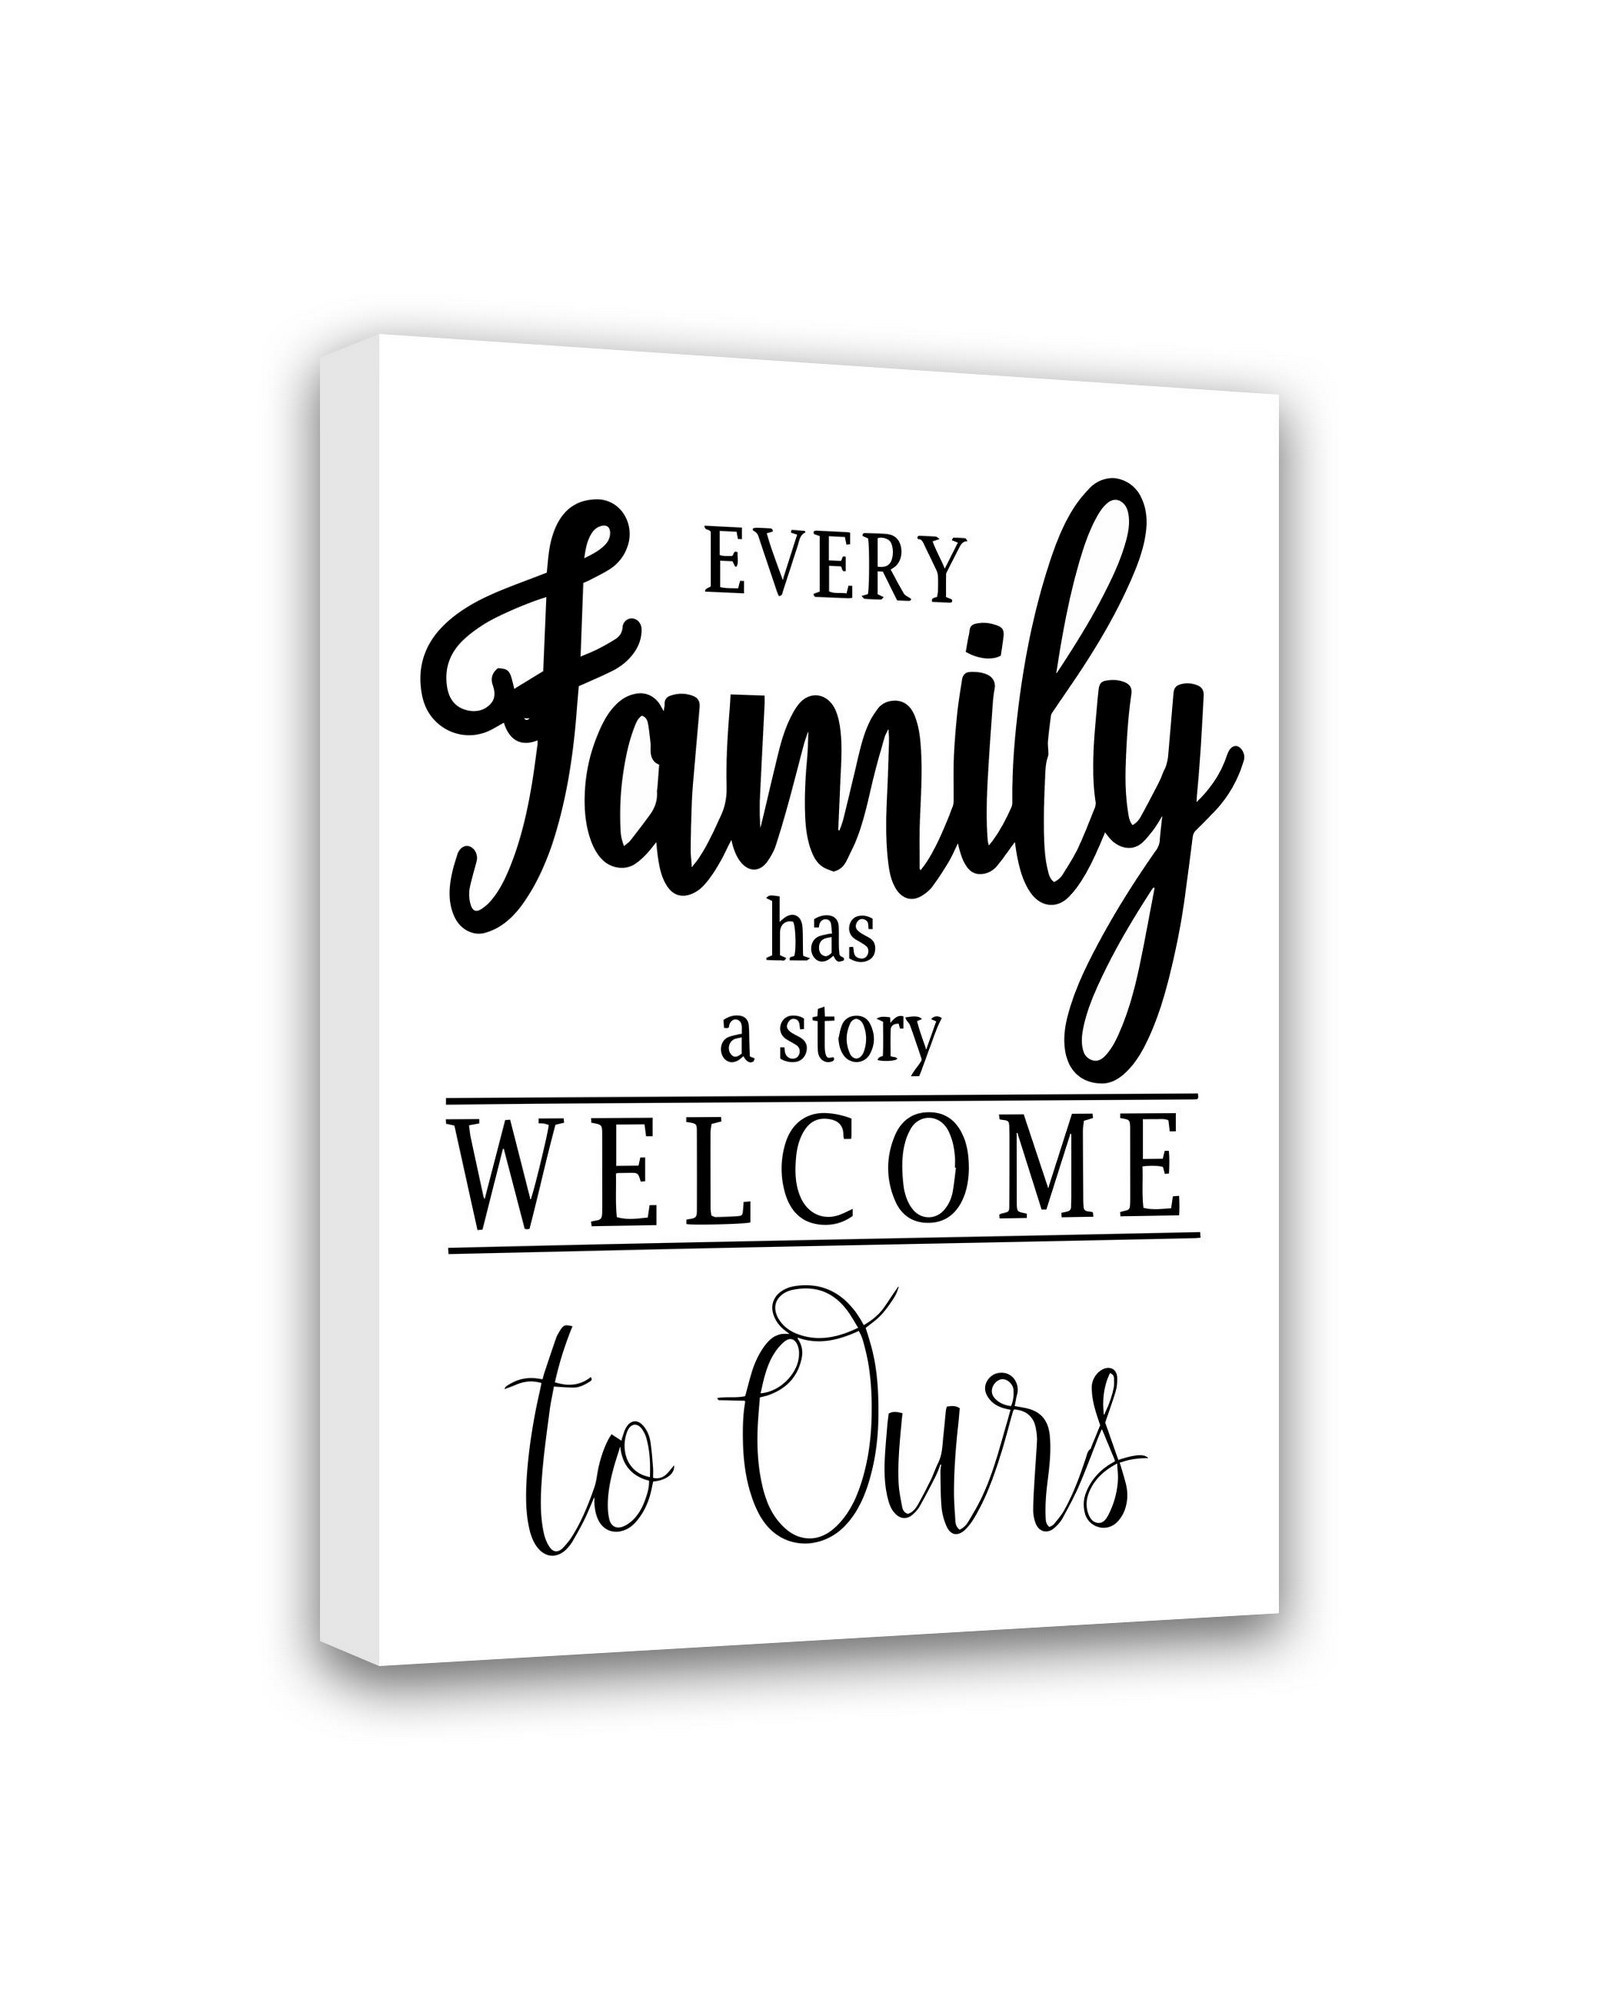 90021587 Постер Every family has a story. Welcome to ours МТ-037, 40х30 см STLM-0087844 СИМФОНИЯ